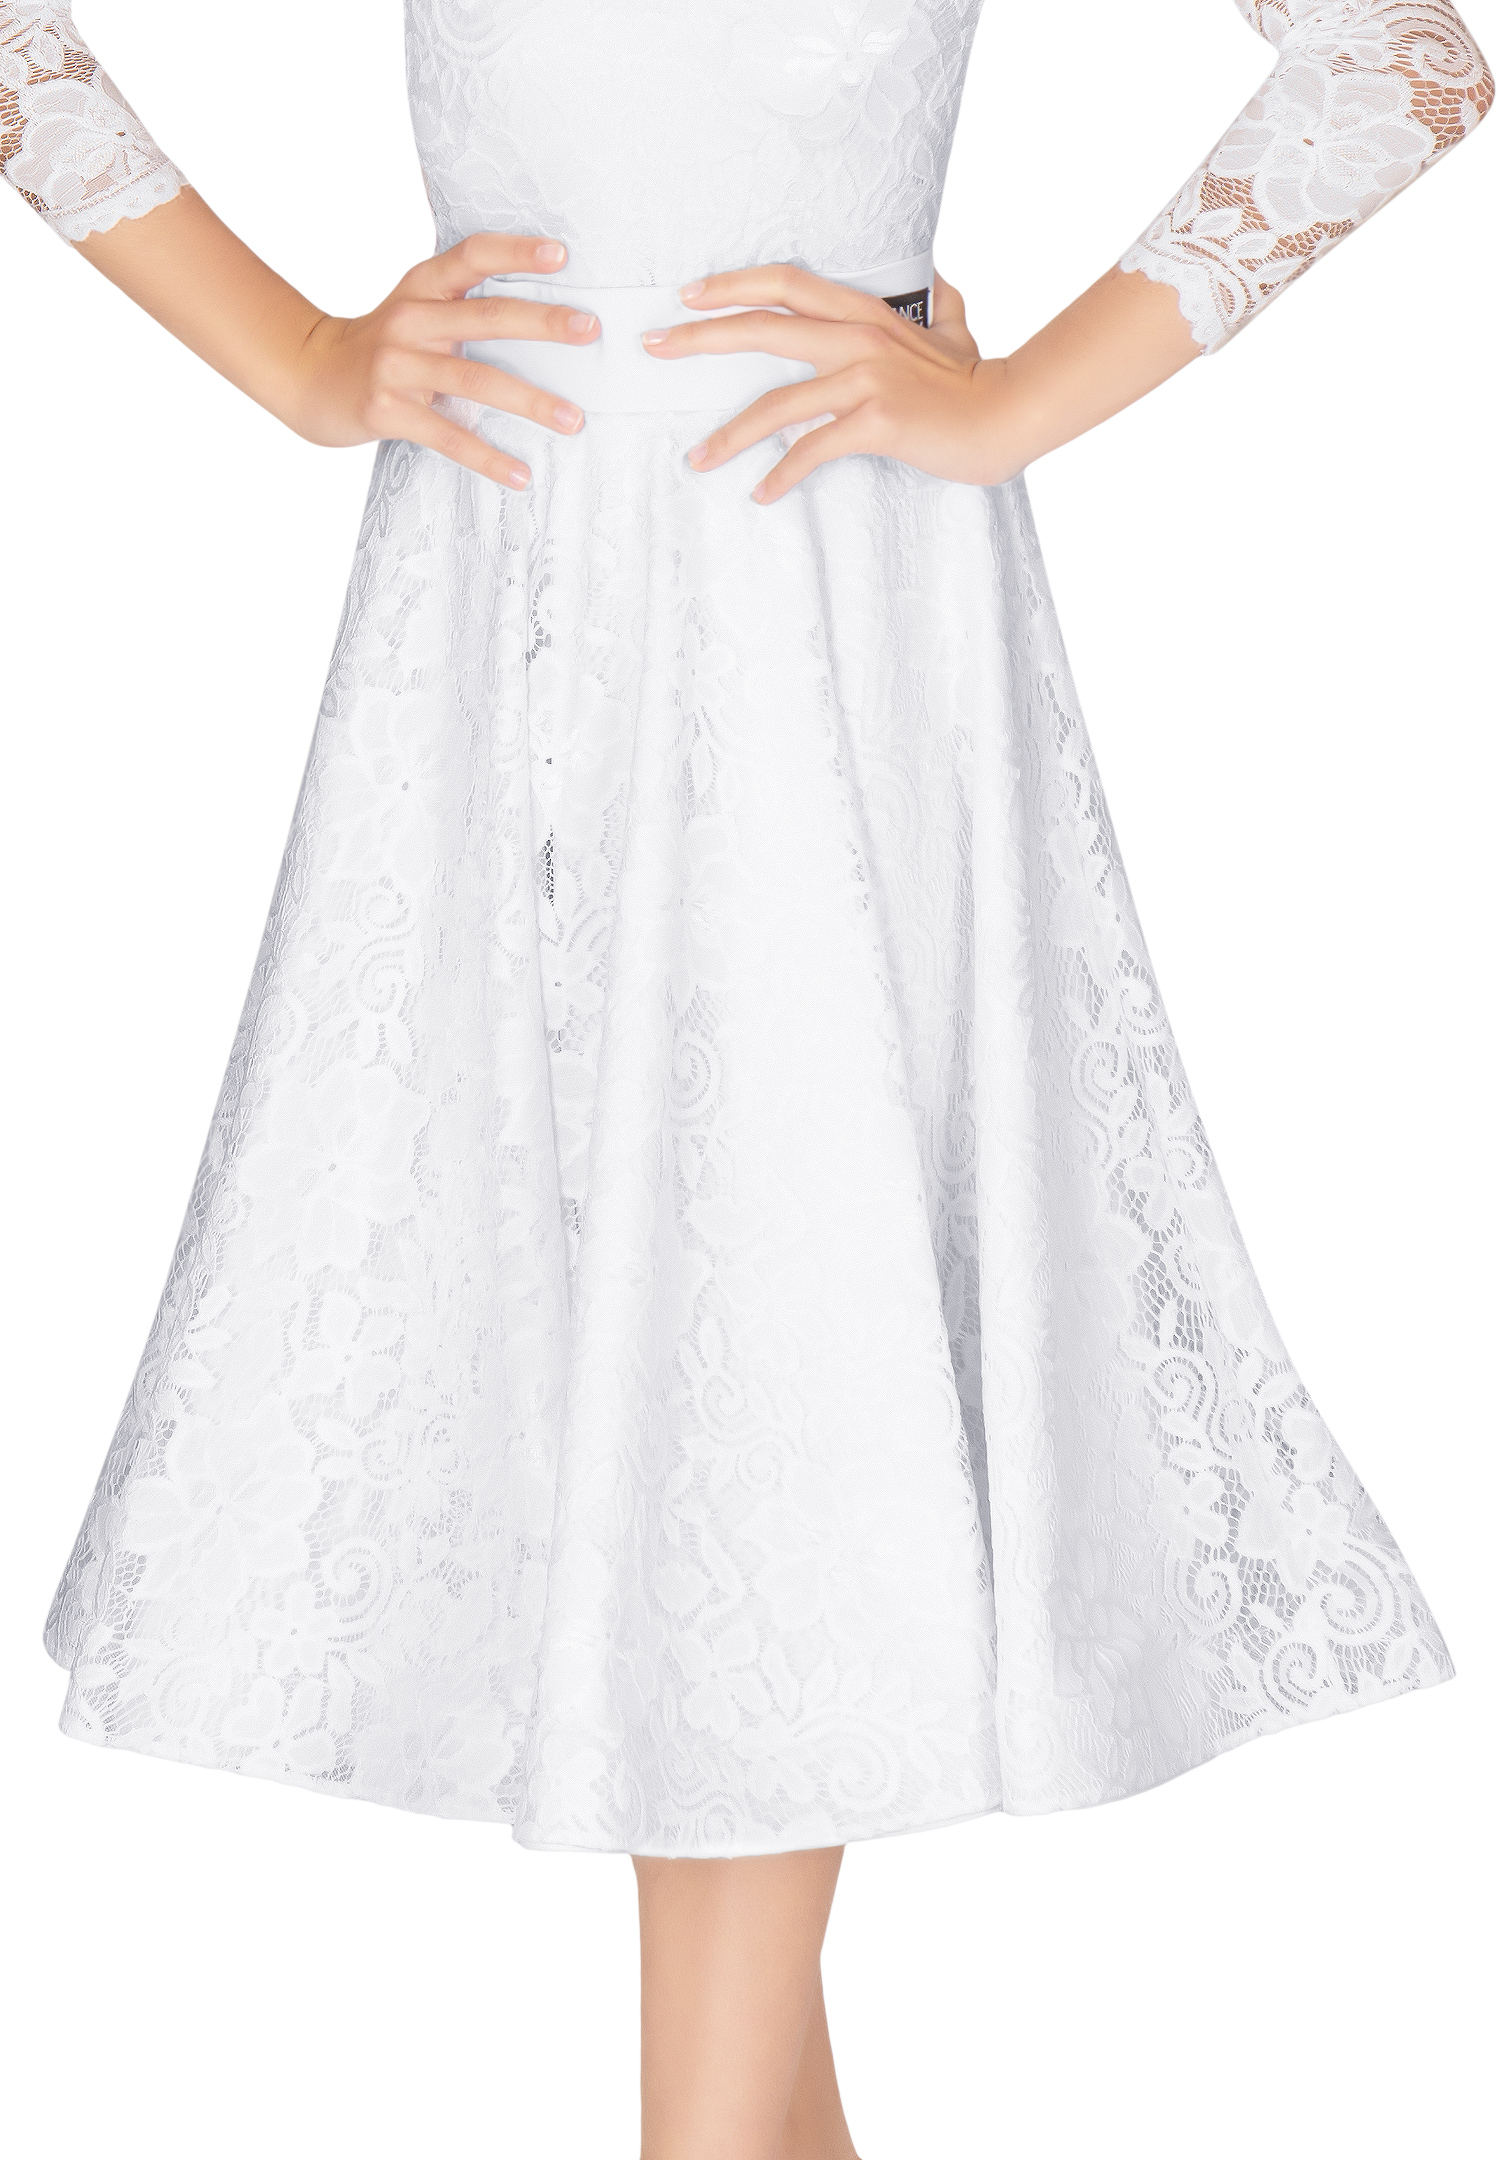 White Standard Ballroom Dance Dresses Simple Style Tango Waltz Dancing Skirt  with Flower Pattern Dance Competition Dress Modern Costumes : Buy Online at  Best Price in KSA - Souq is now Amazon.sa: